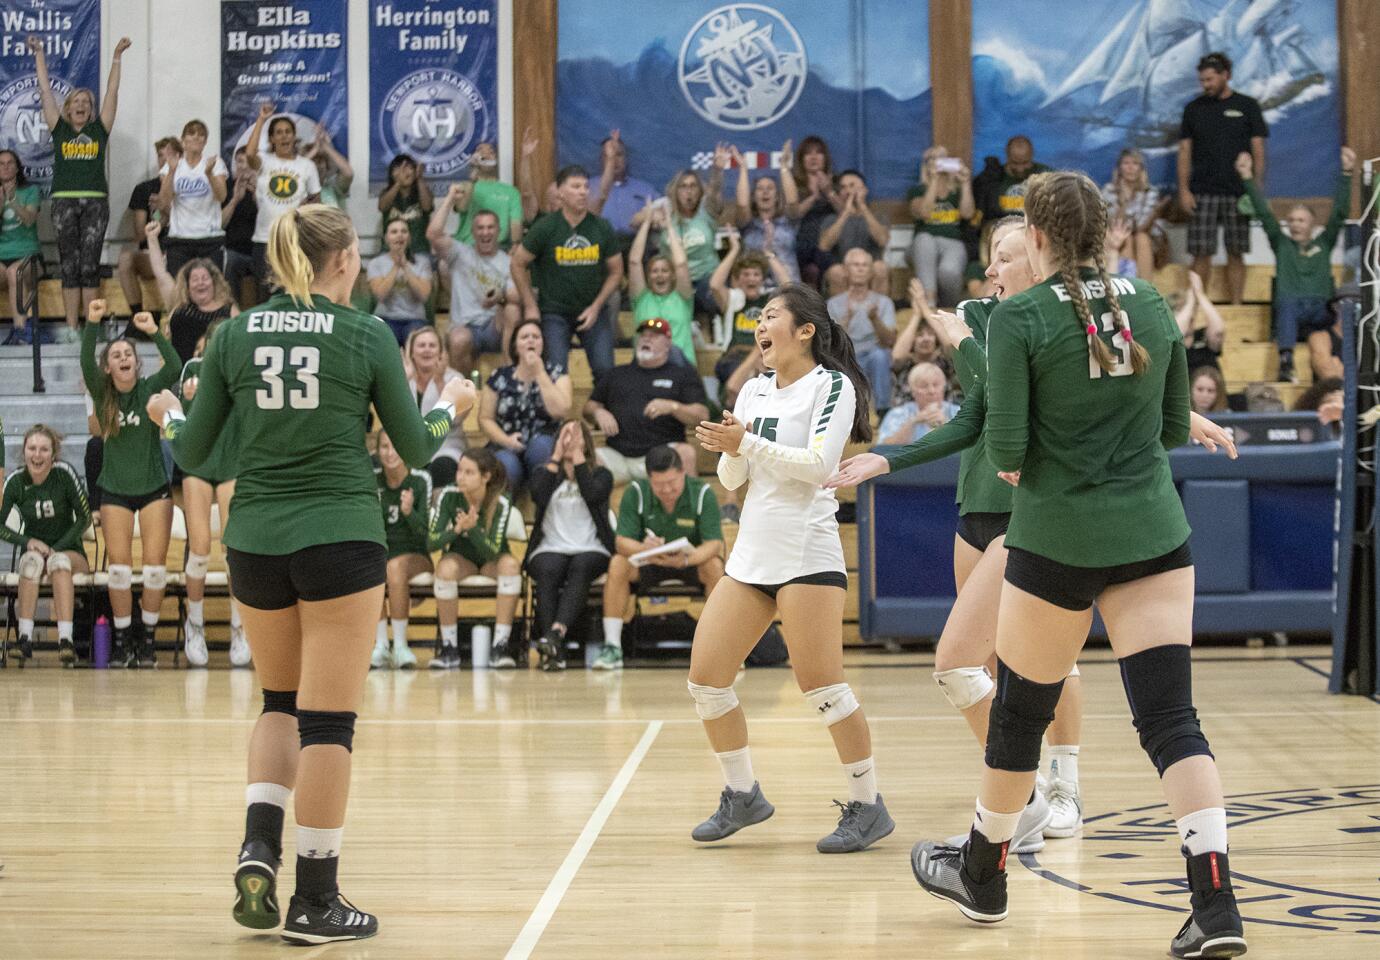 Edison celebrates after sweeping Newport Harbor 3-0 in a first round CIF Southern Section Division 2 playoff game on Thursday, October 18.